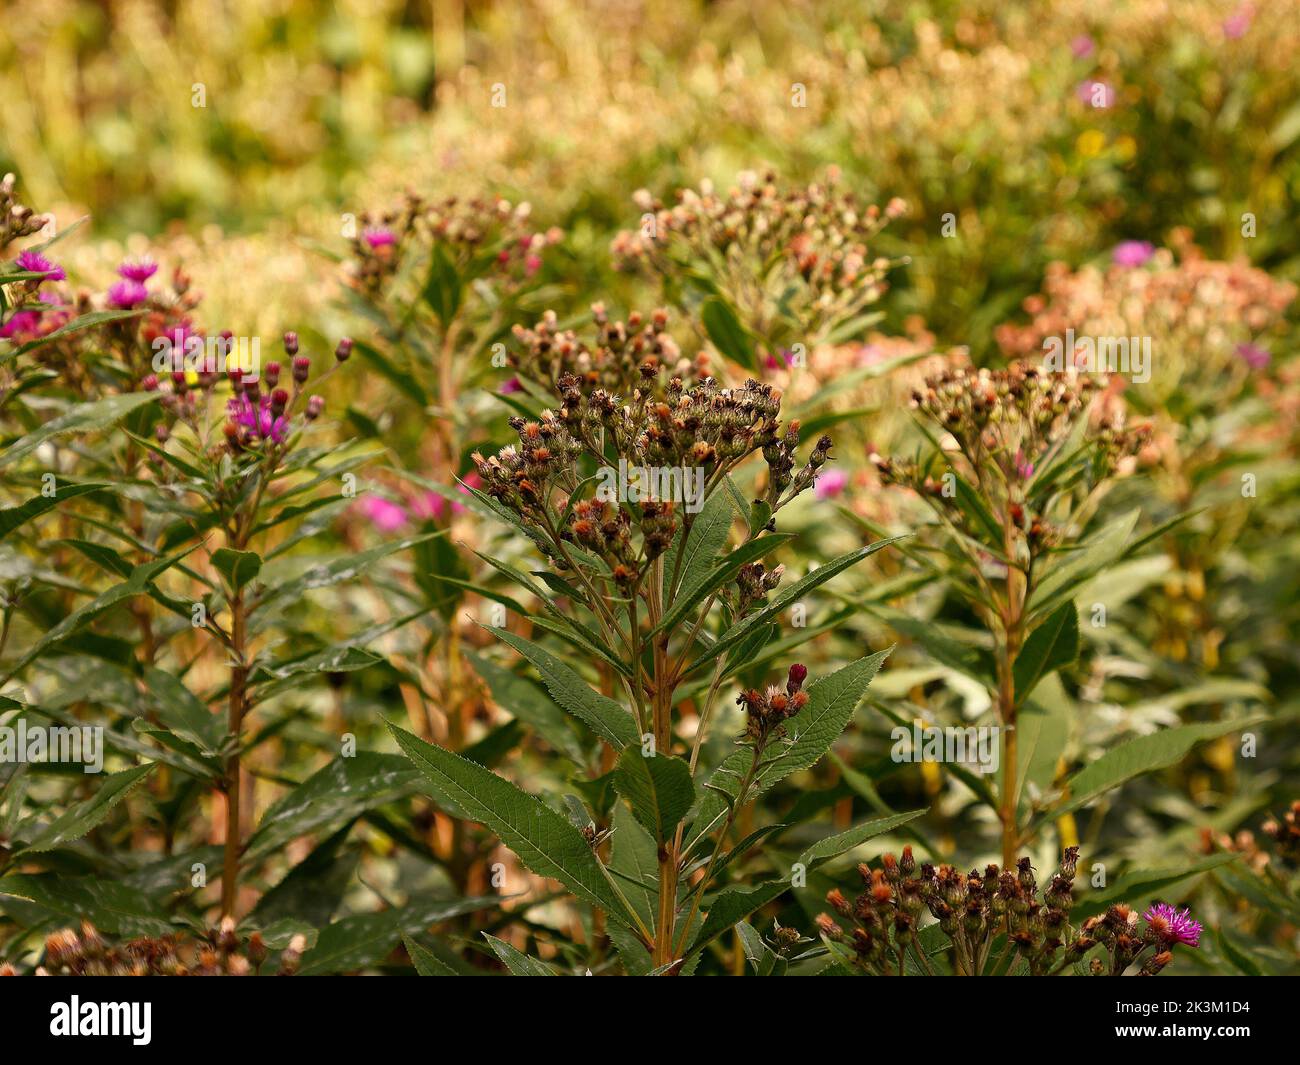 Close up of the 2m tall growing herbaceous perennial garden plant withered flowers of Vernonia arkansana or Arkansas ironweed seen in moist soil. Stock Photo